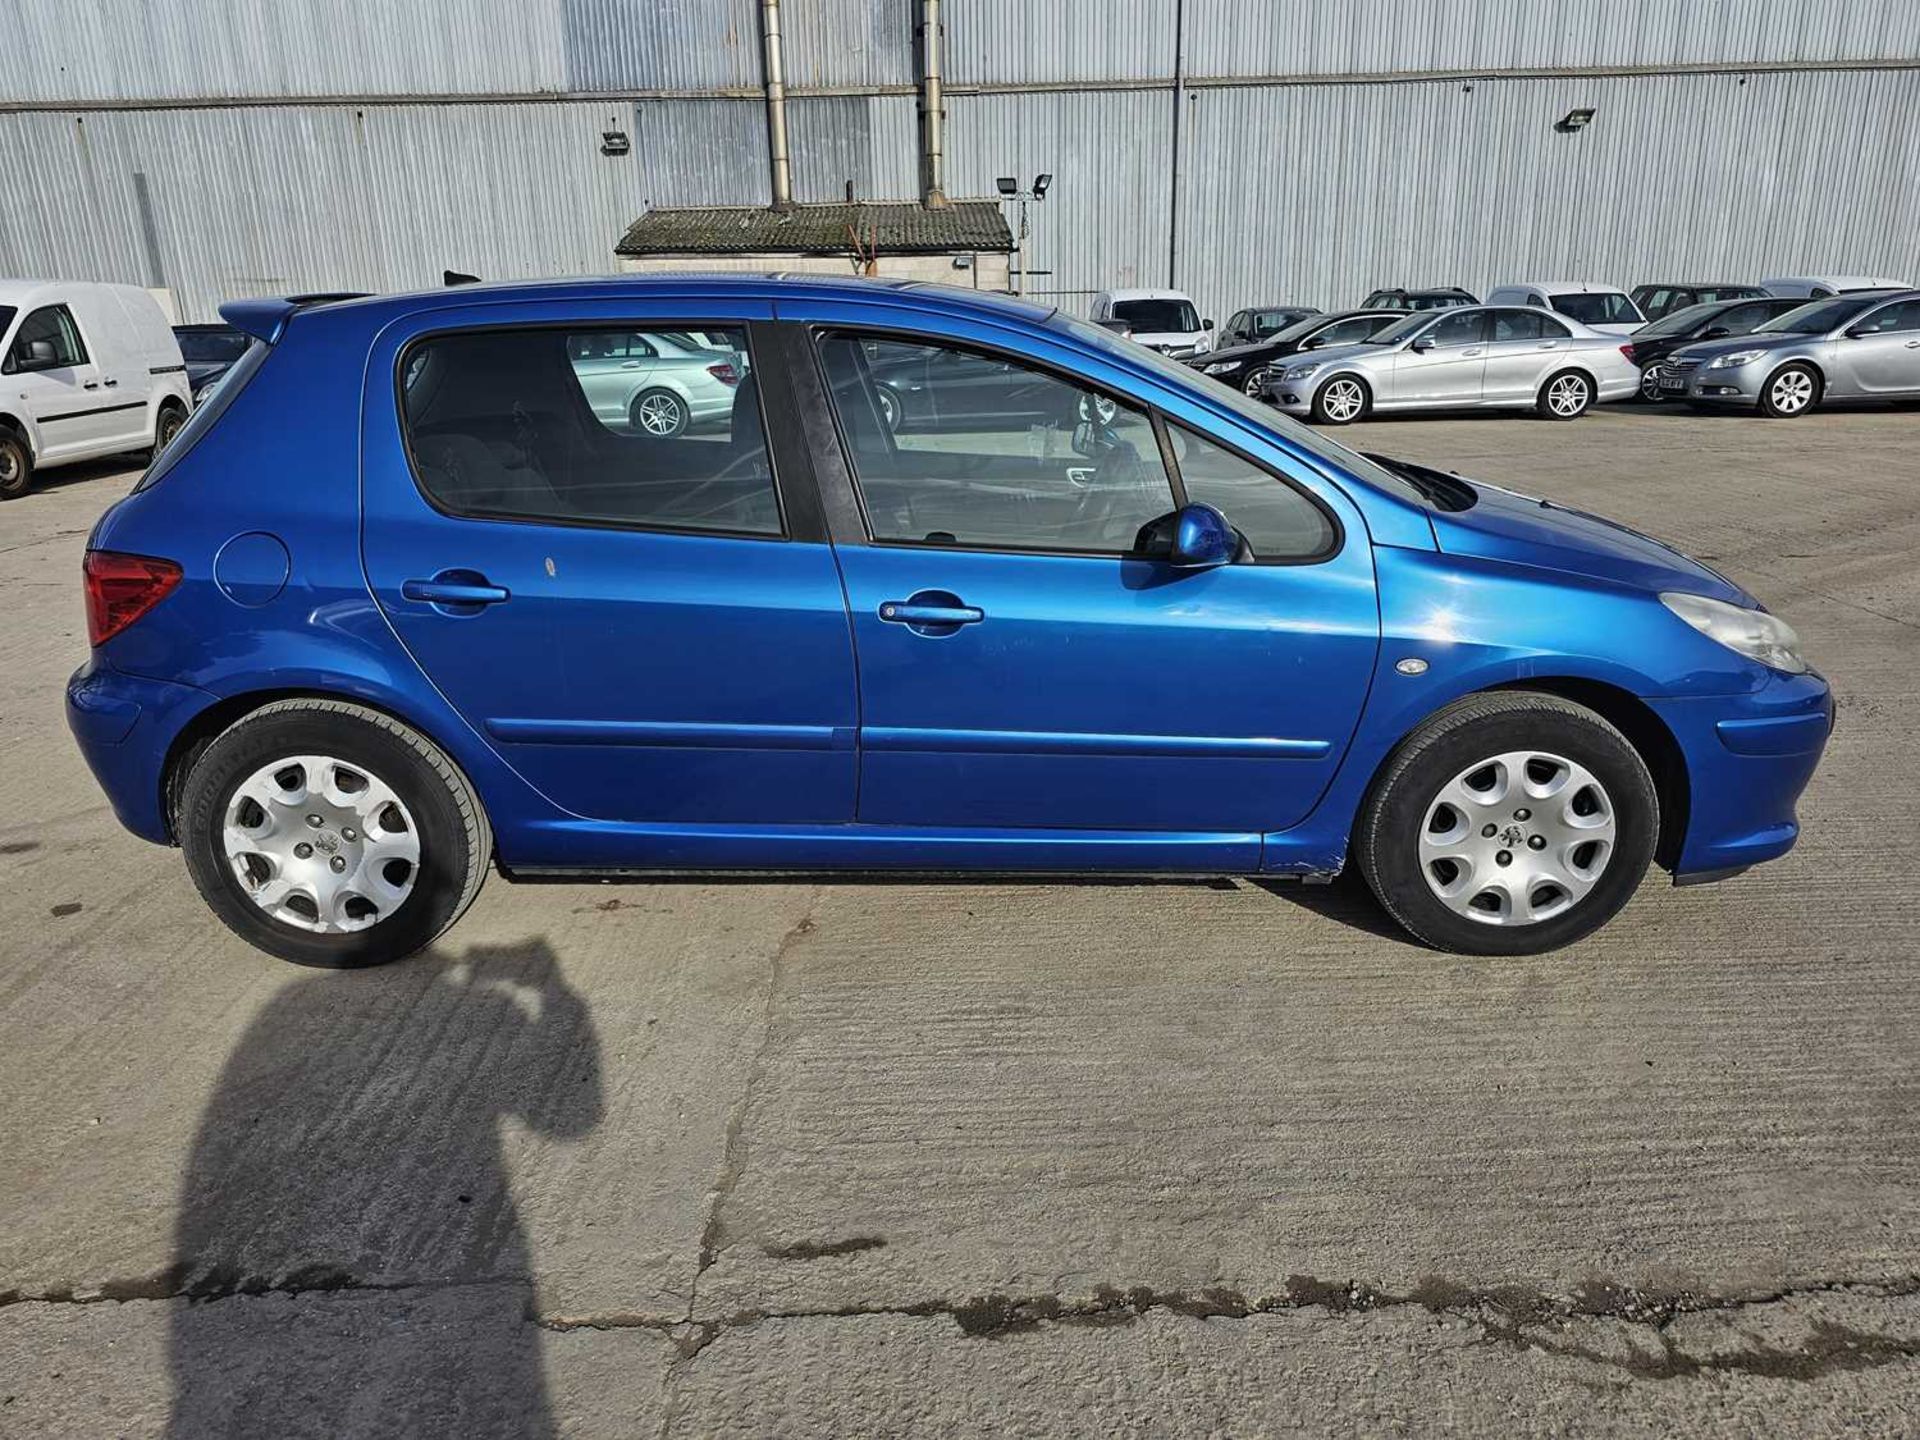 2007 Peugeot 307 X-line, 5 Speed, A/C (Reg. Docs. & Service History Available, Tested 07/24) - Image 8 of 28